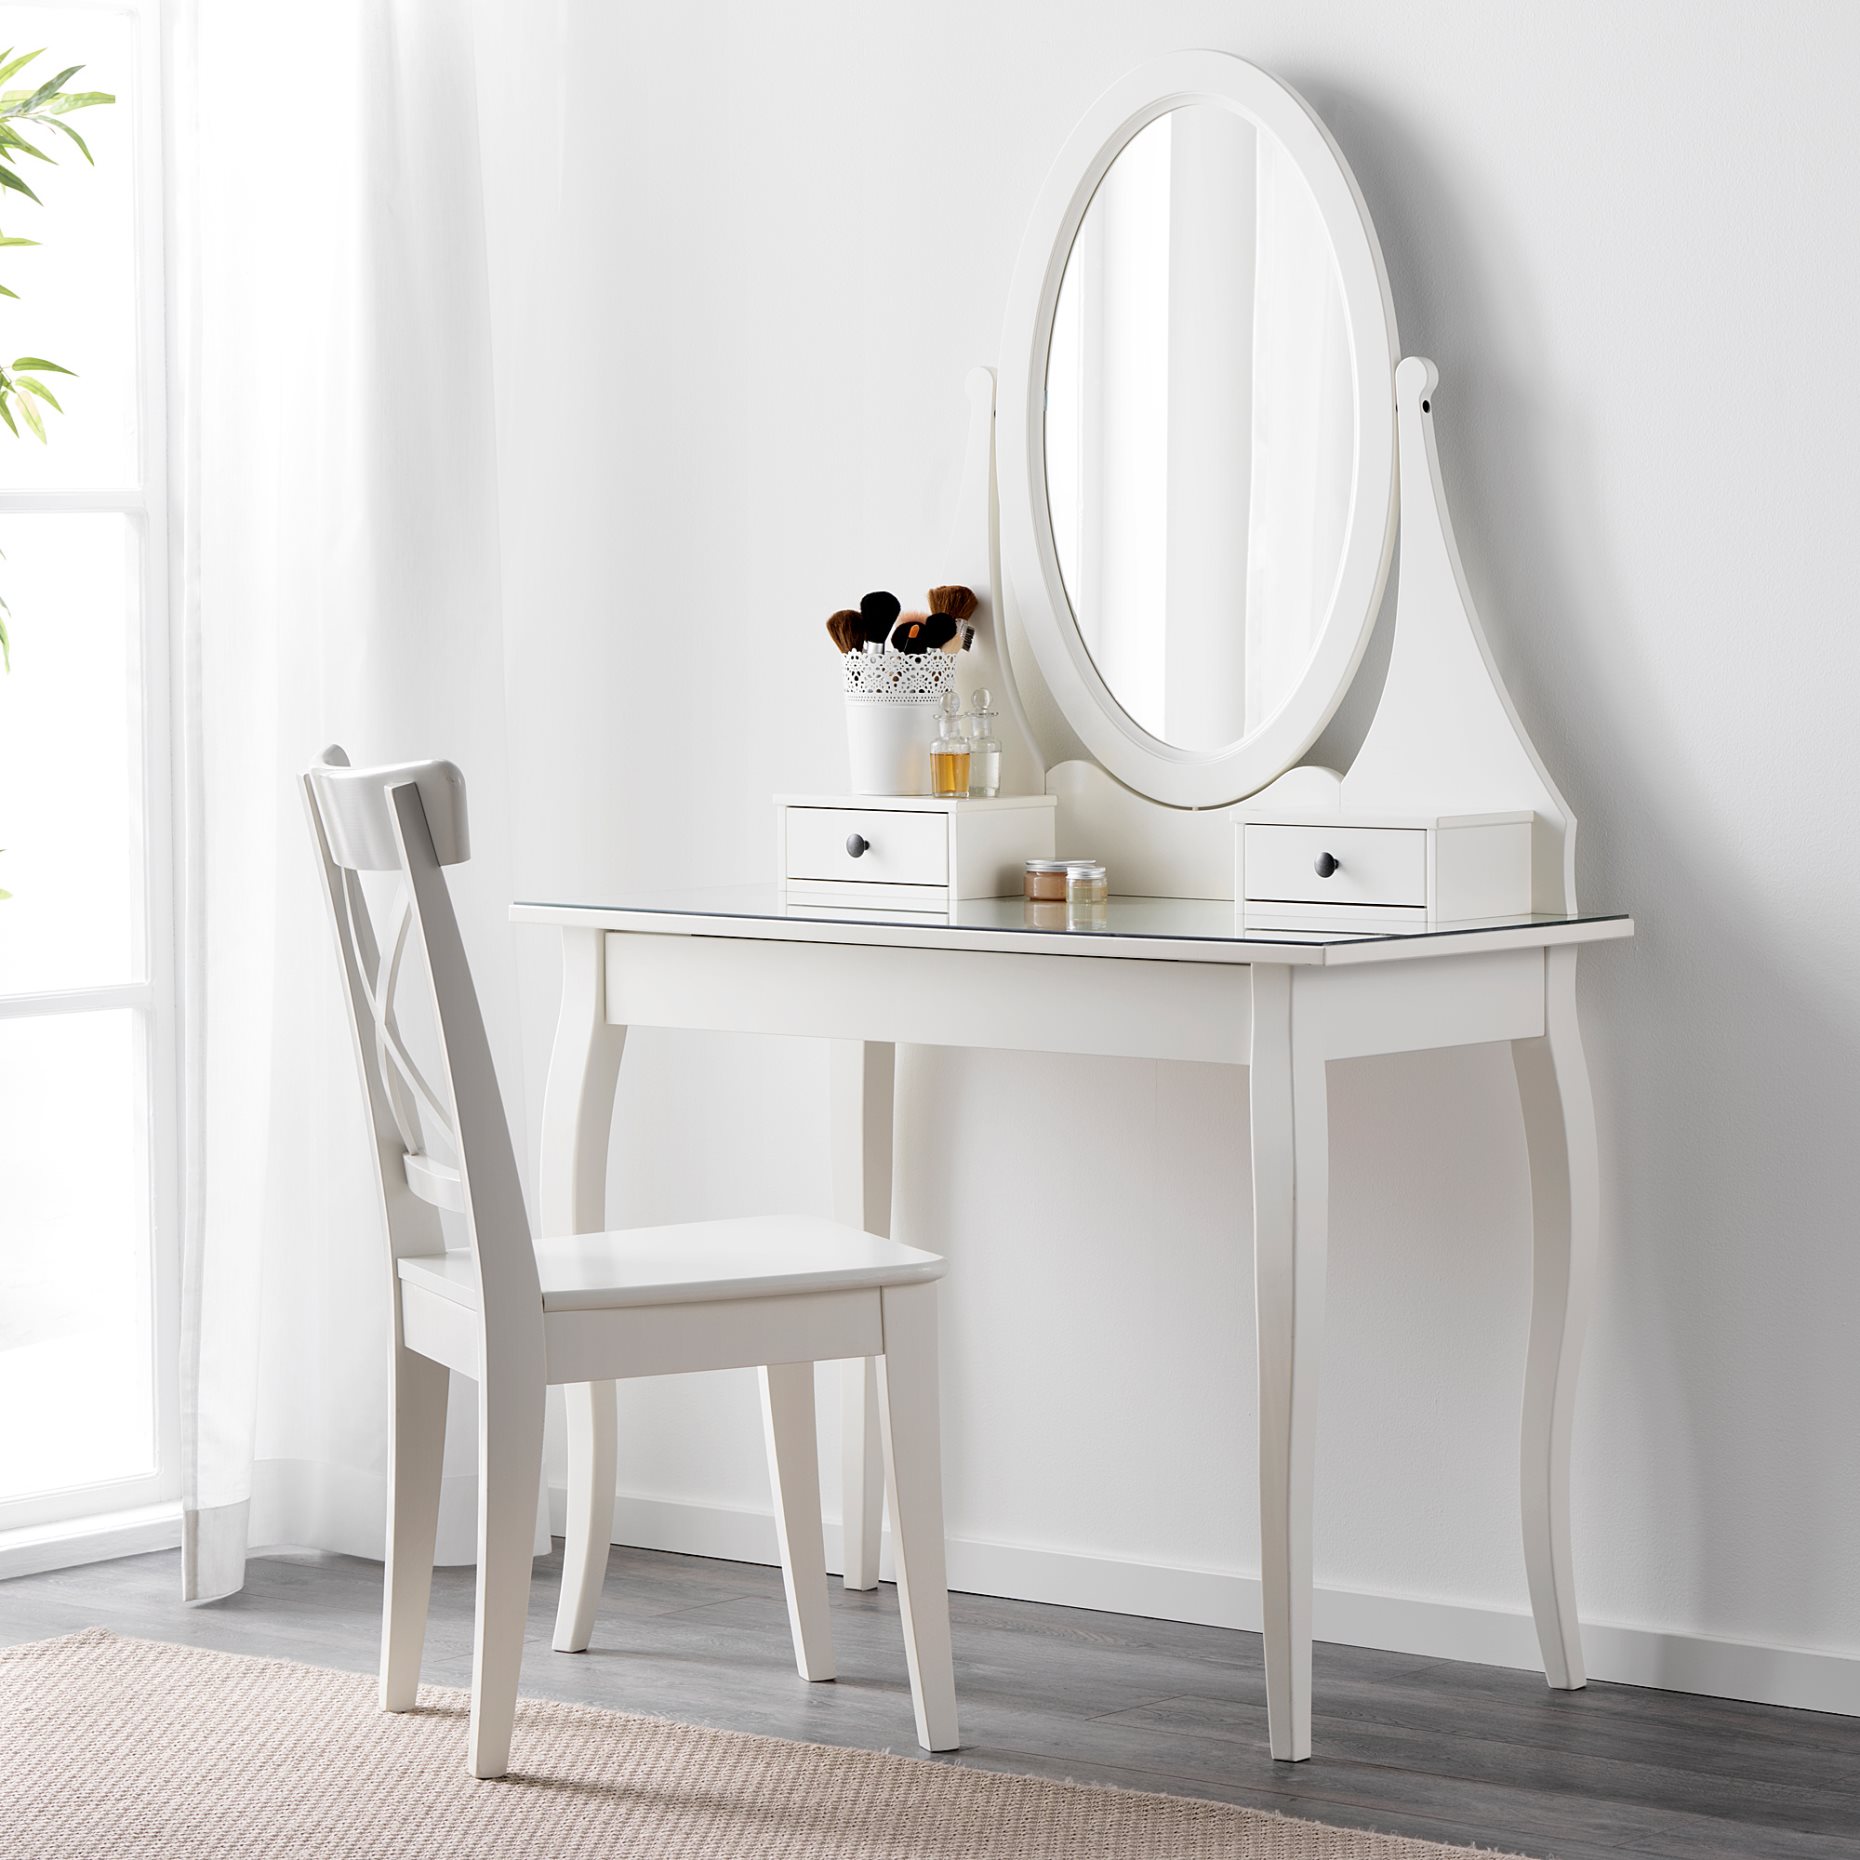 HEMNES, dressing table with mirror, 303.744.13